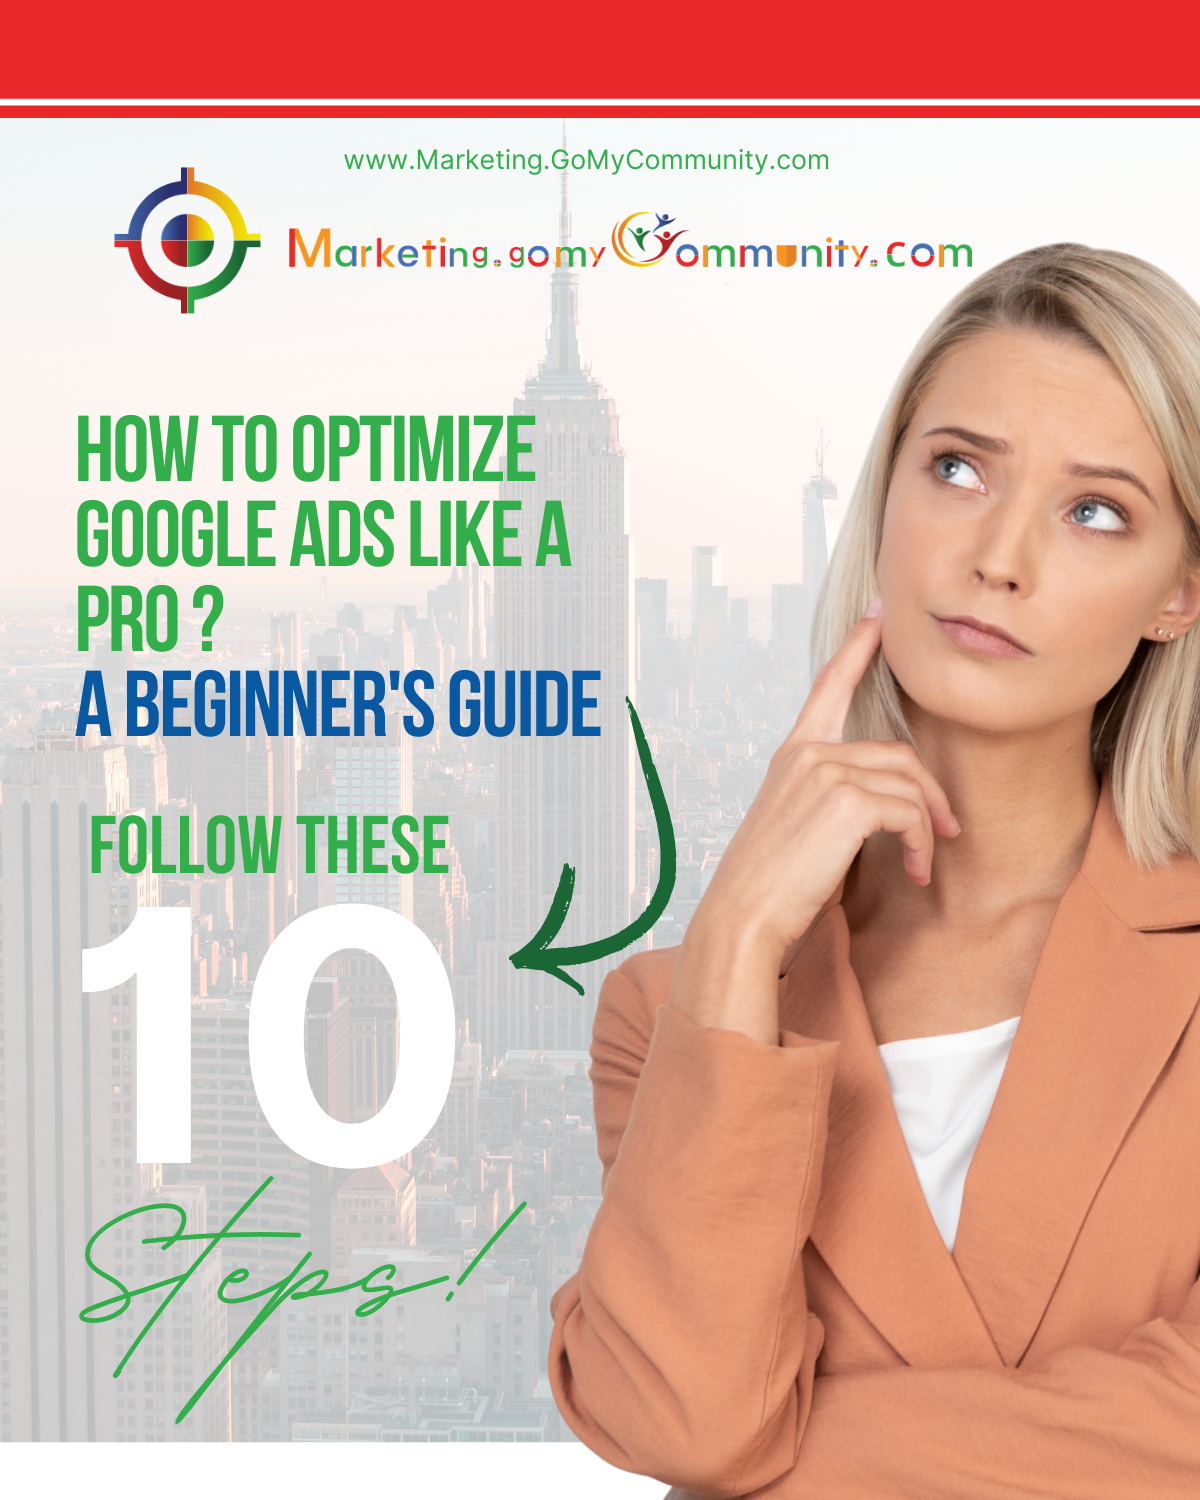 How to Optimize Google Ads Like a Pro: A Beginner’s Guide